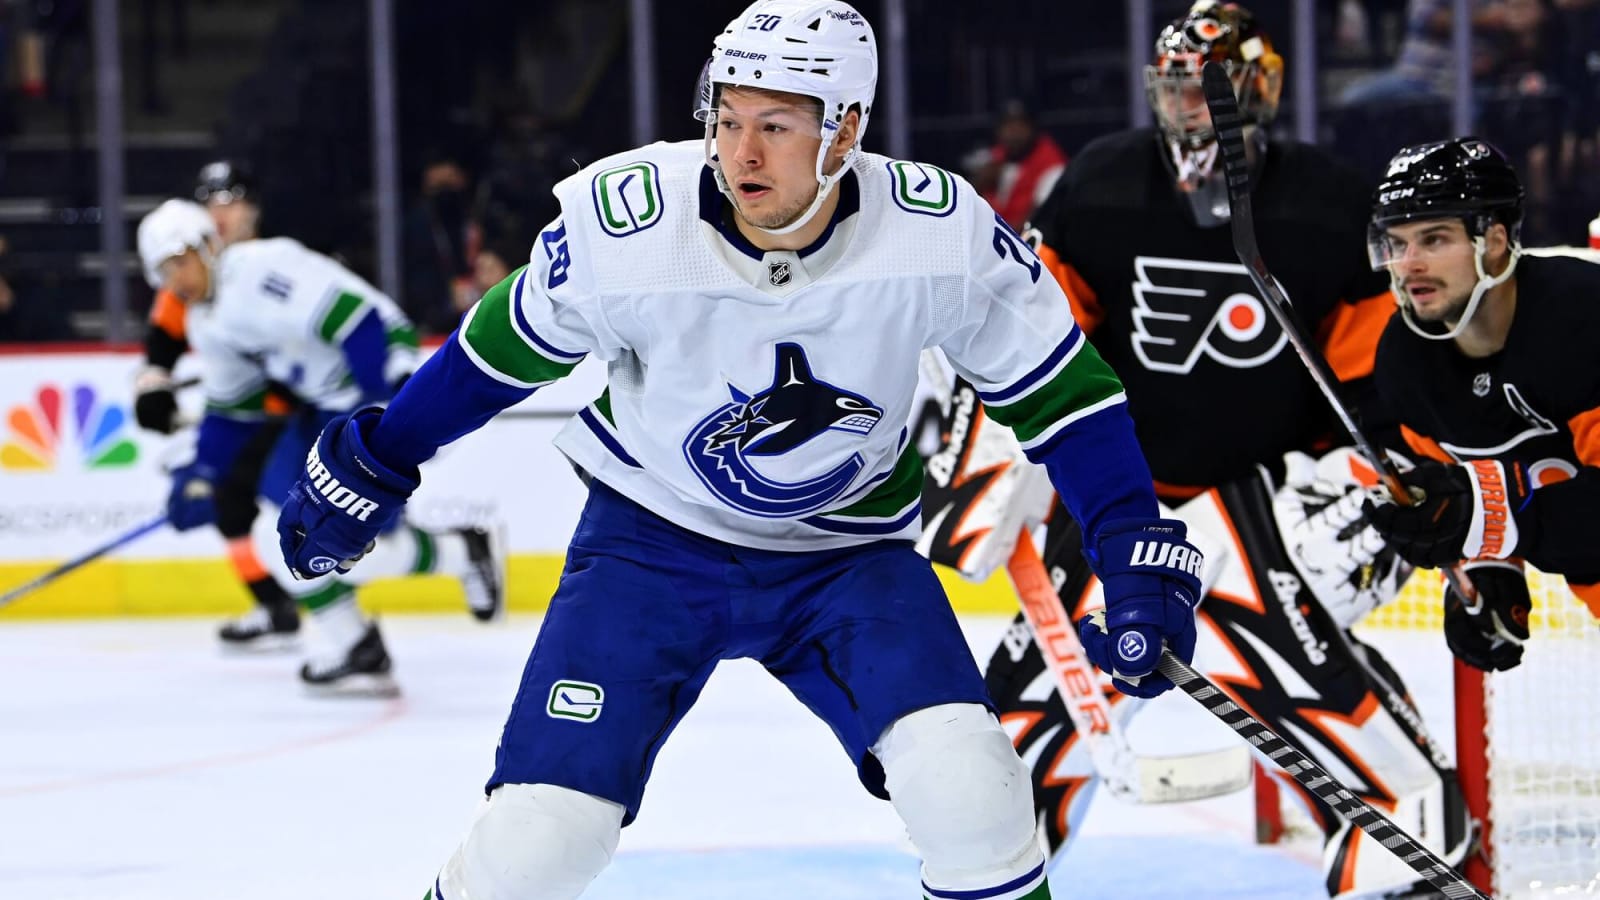 Canucks activate Curtis Lazar off IR, send Will Lockwood to AHL